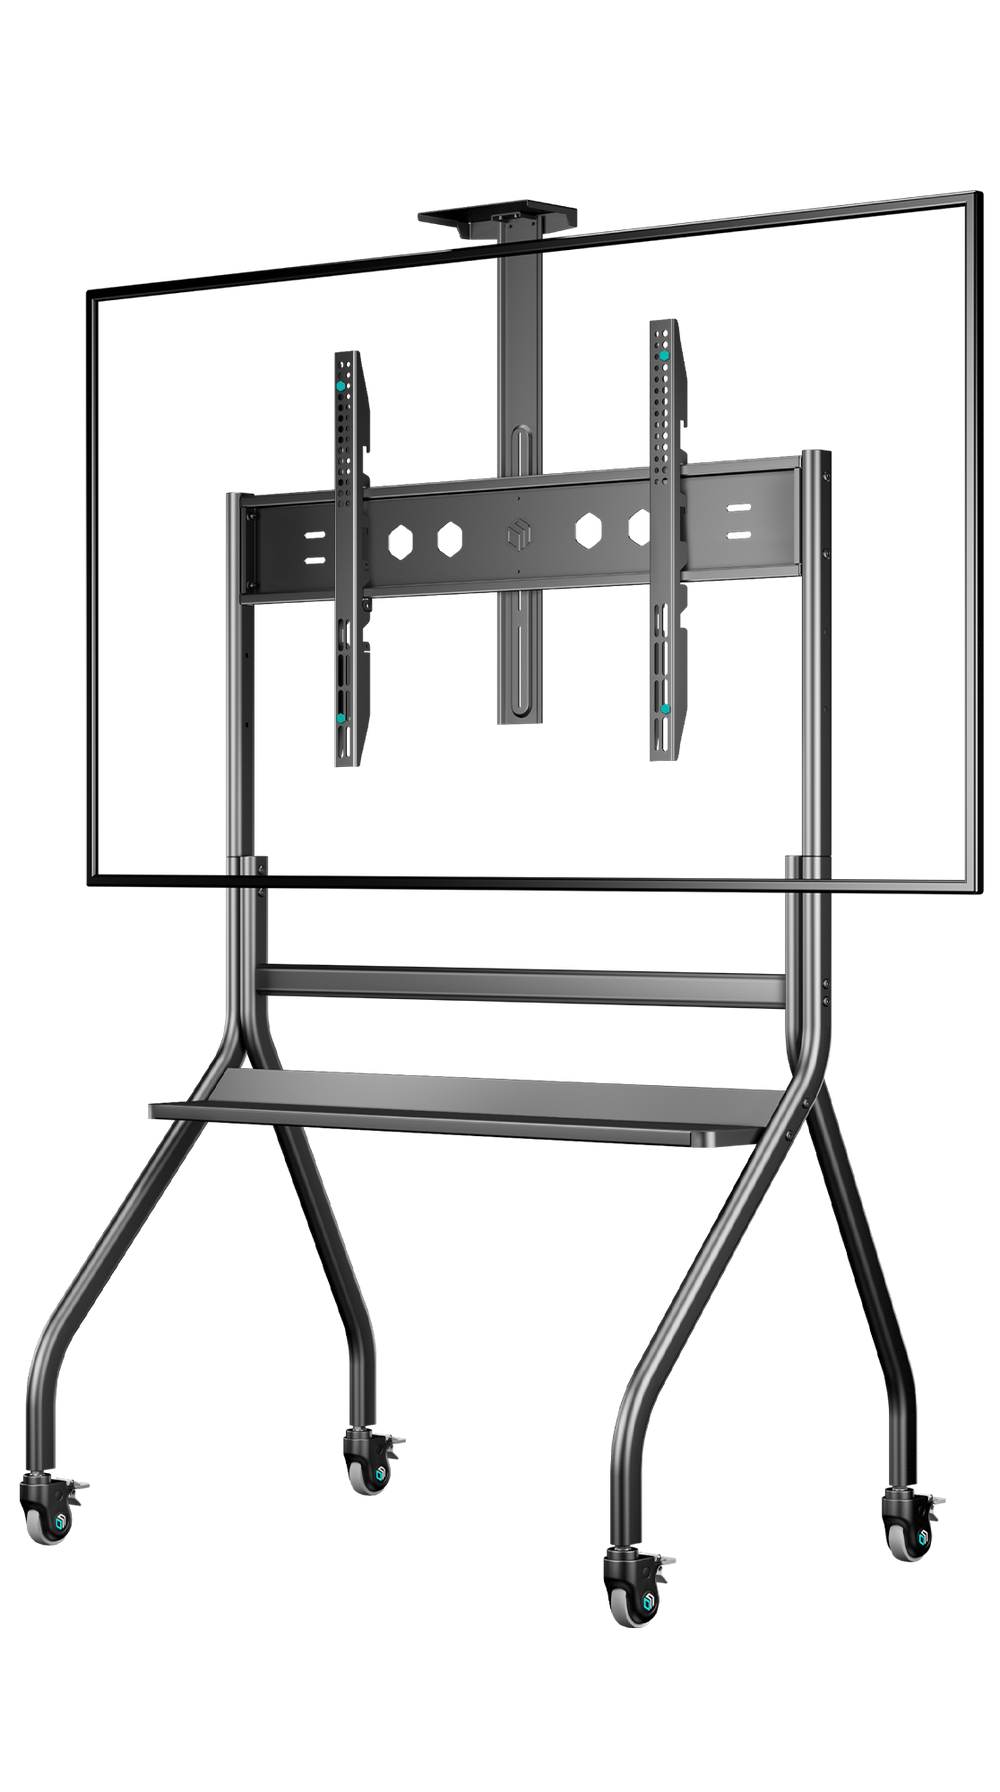 ONKRON Mobile TV stand with bracket 60"-120" Screens up to 256lbs, Black TS2080